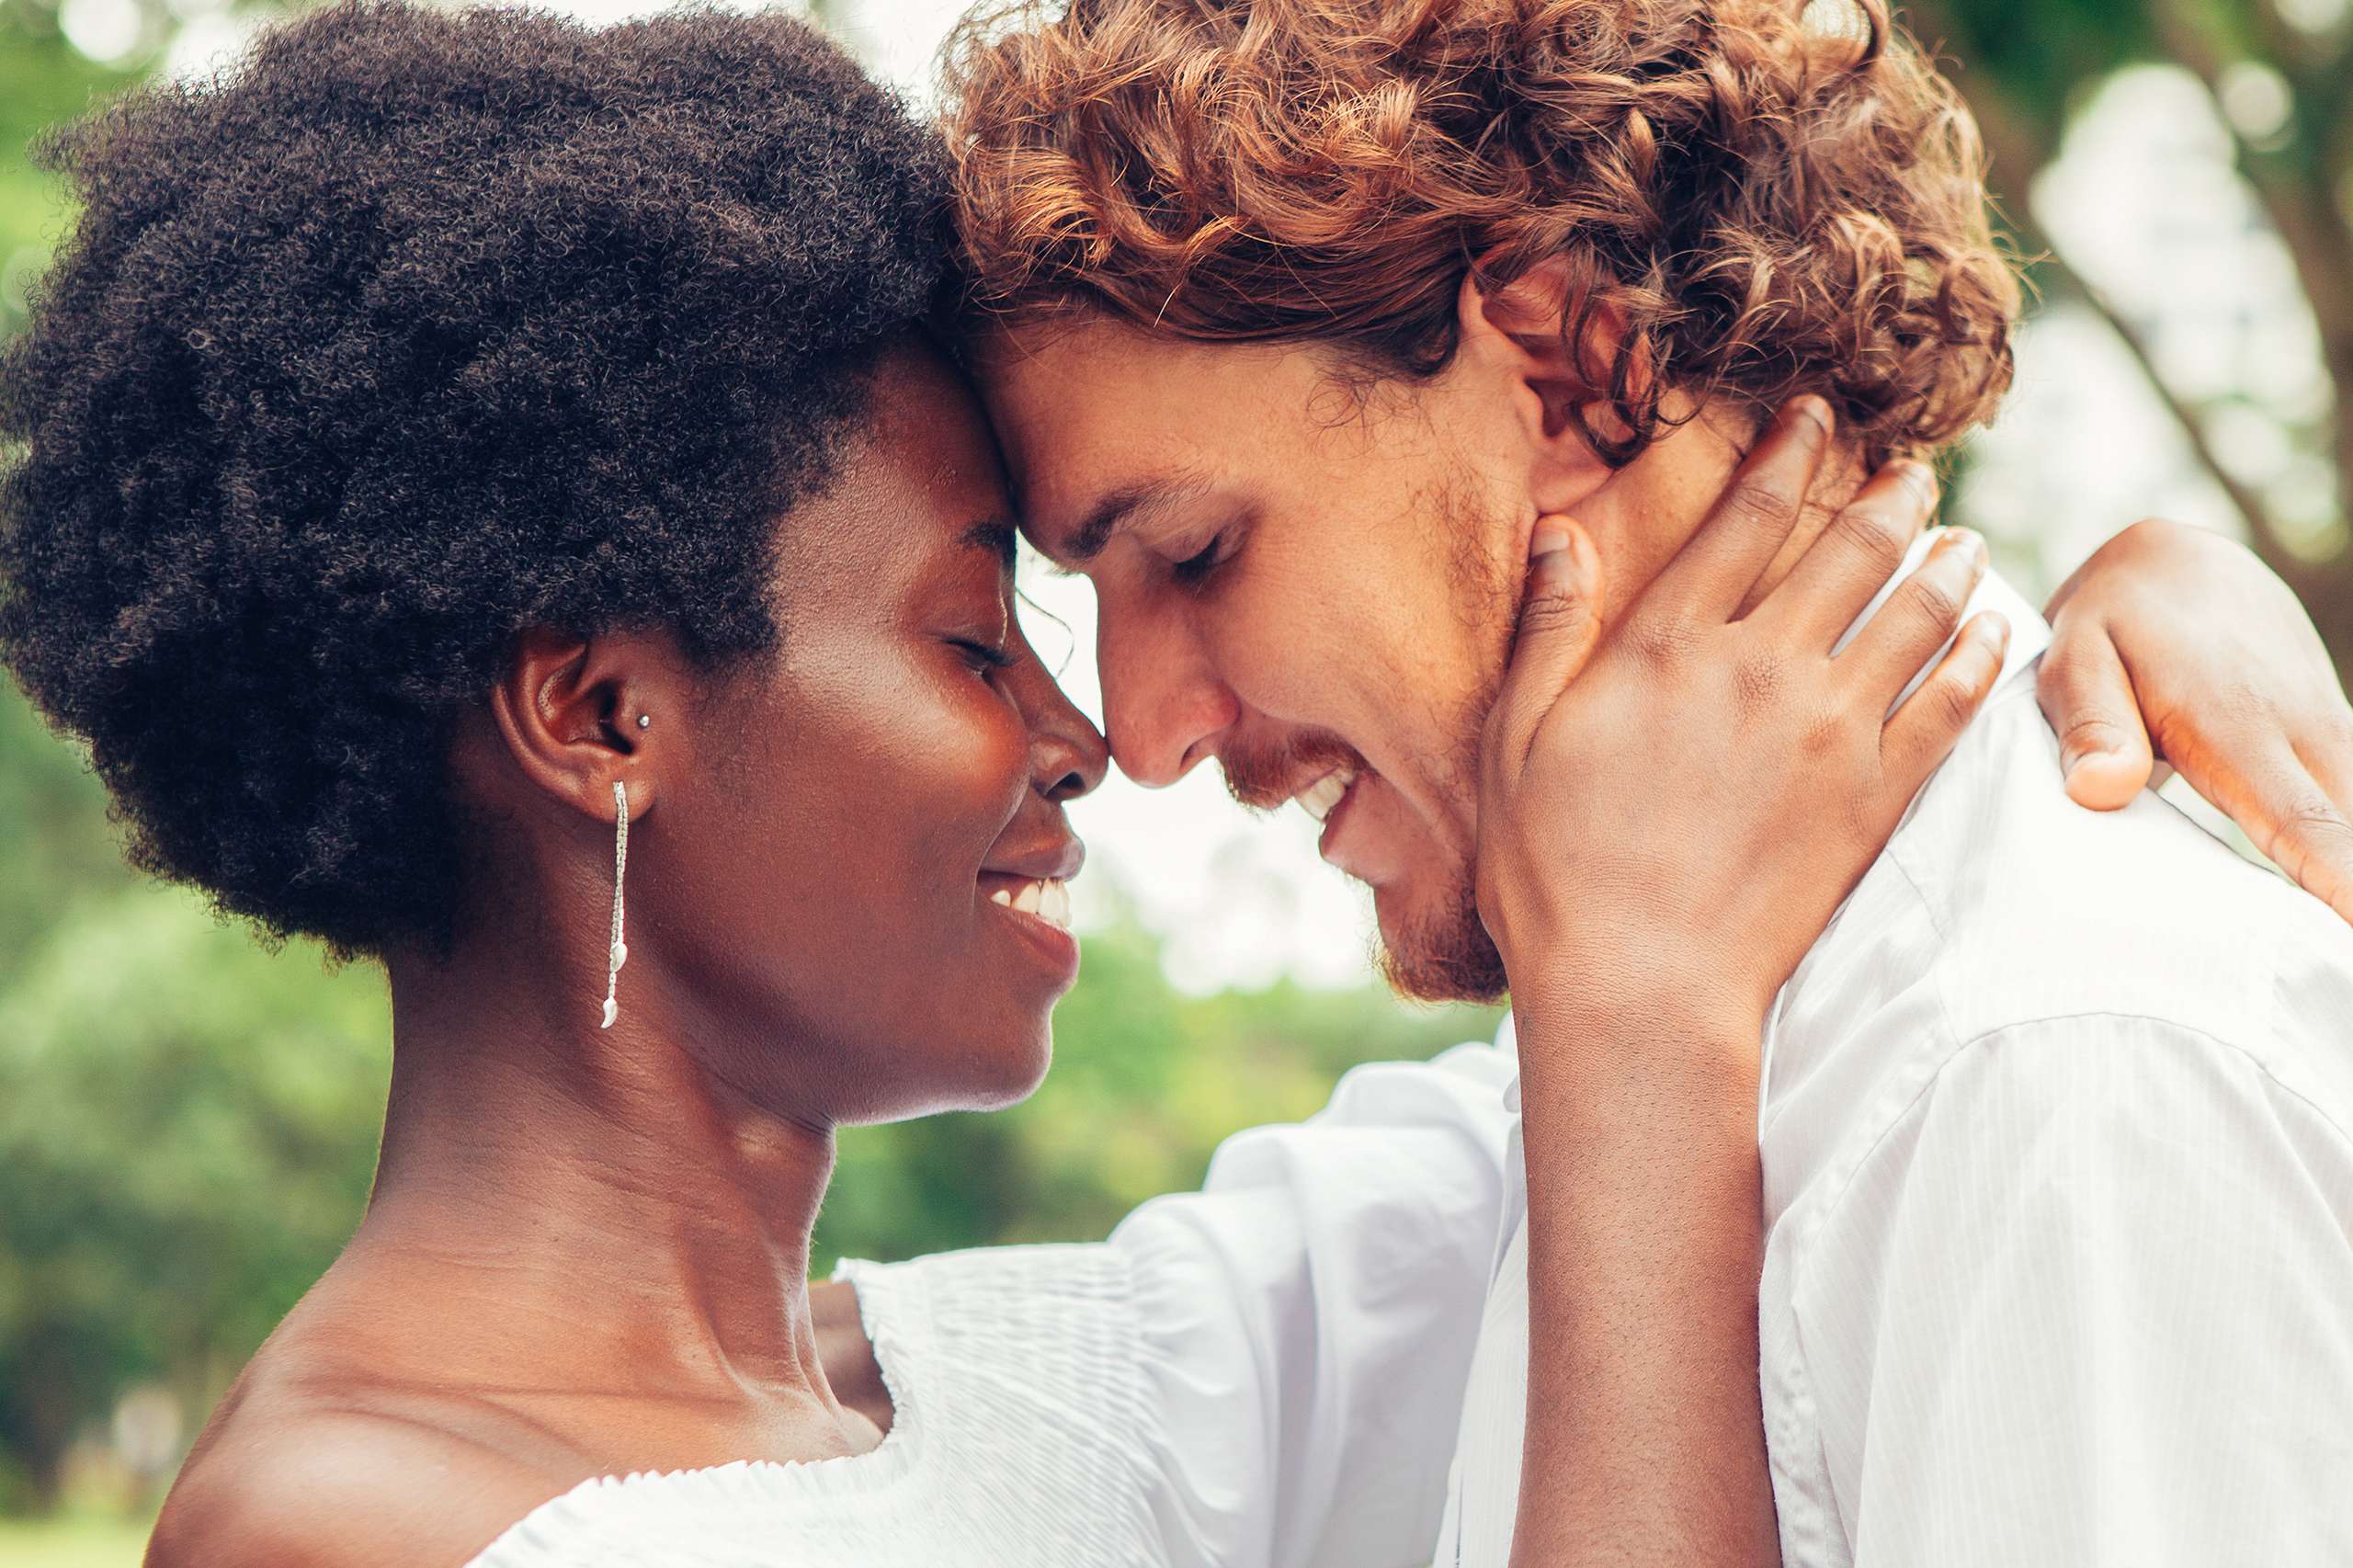 Interracial Couples Pathways to Empowerment pic